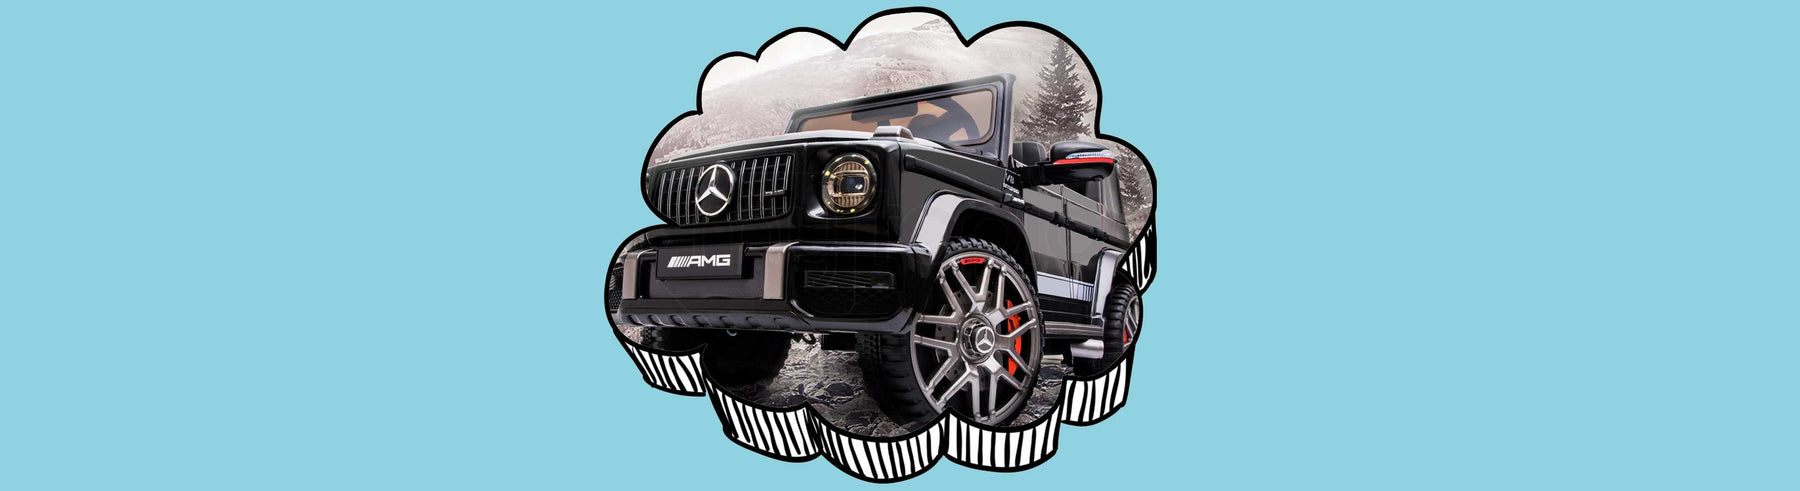 Officially Licensed Mercedes Benz G63 AMG SUV Kids Ride On Car